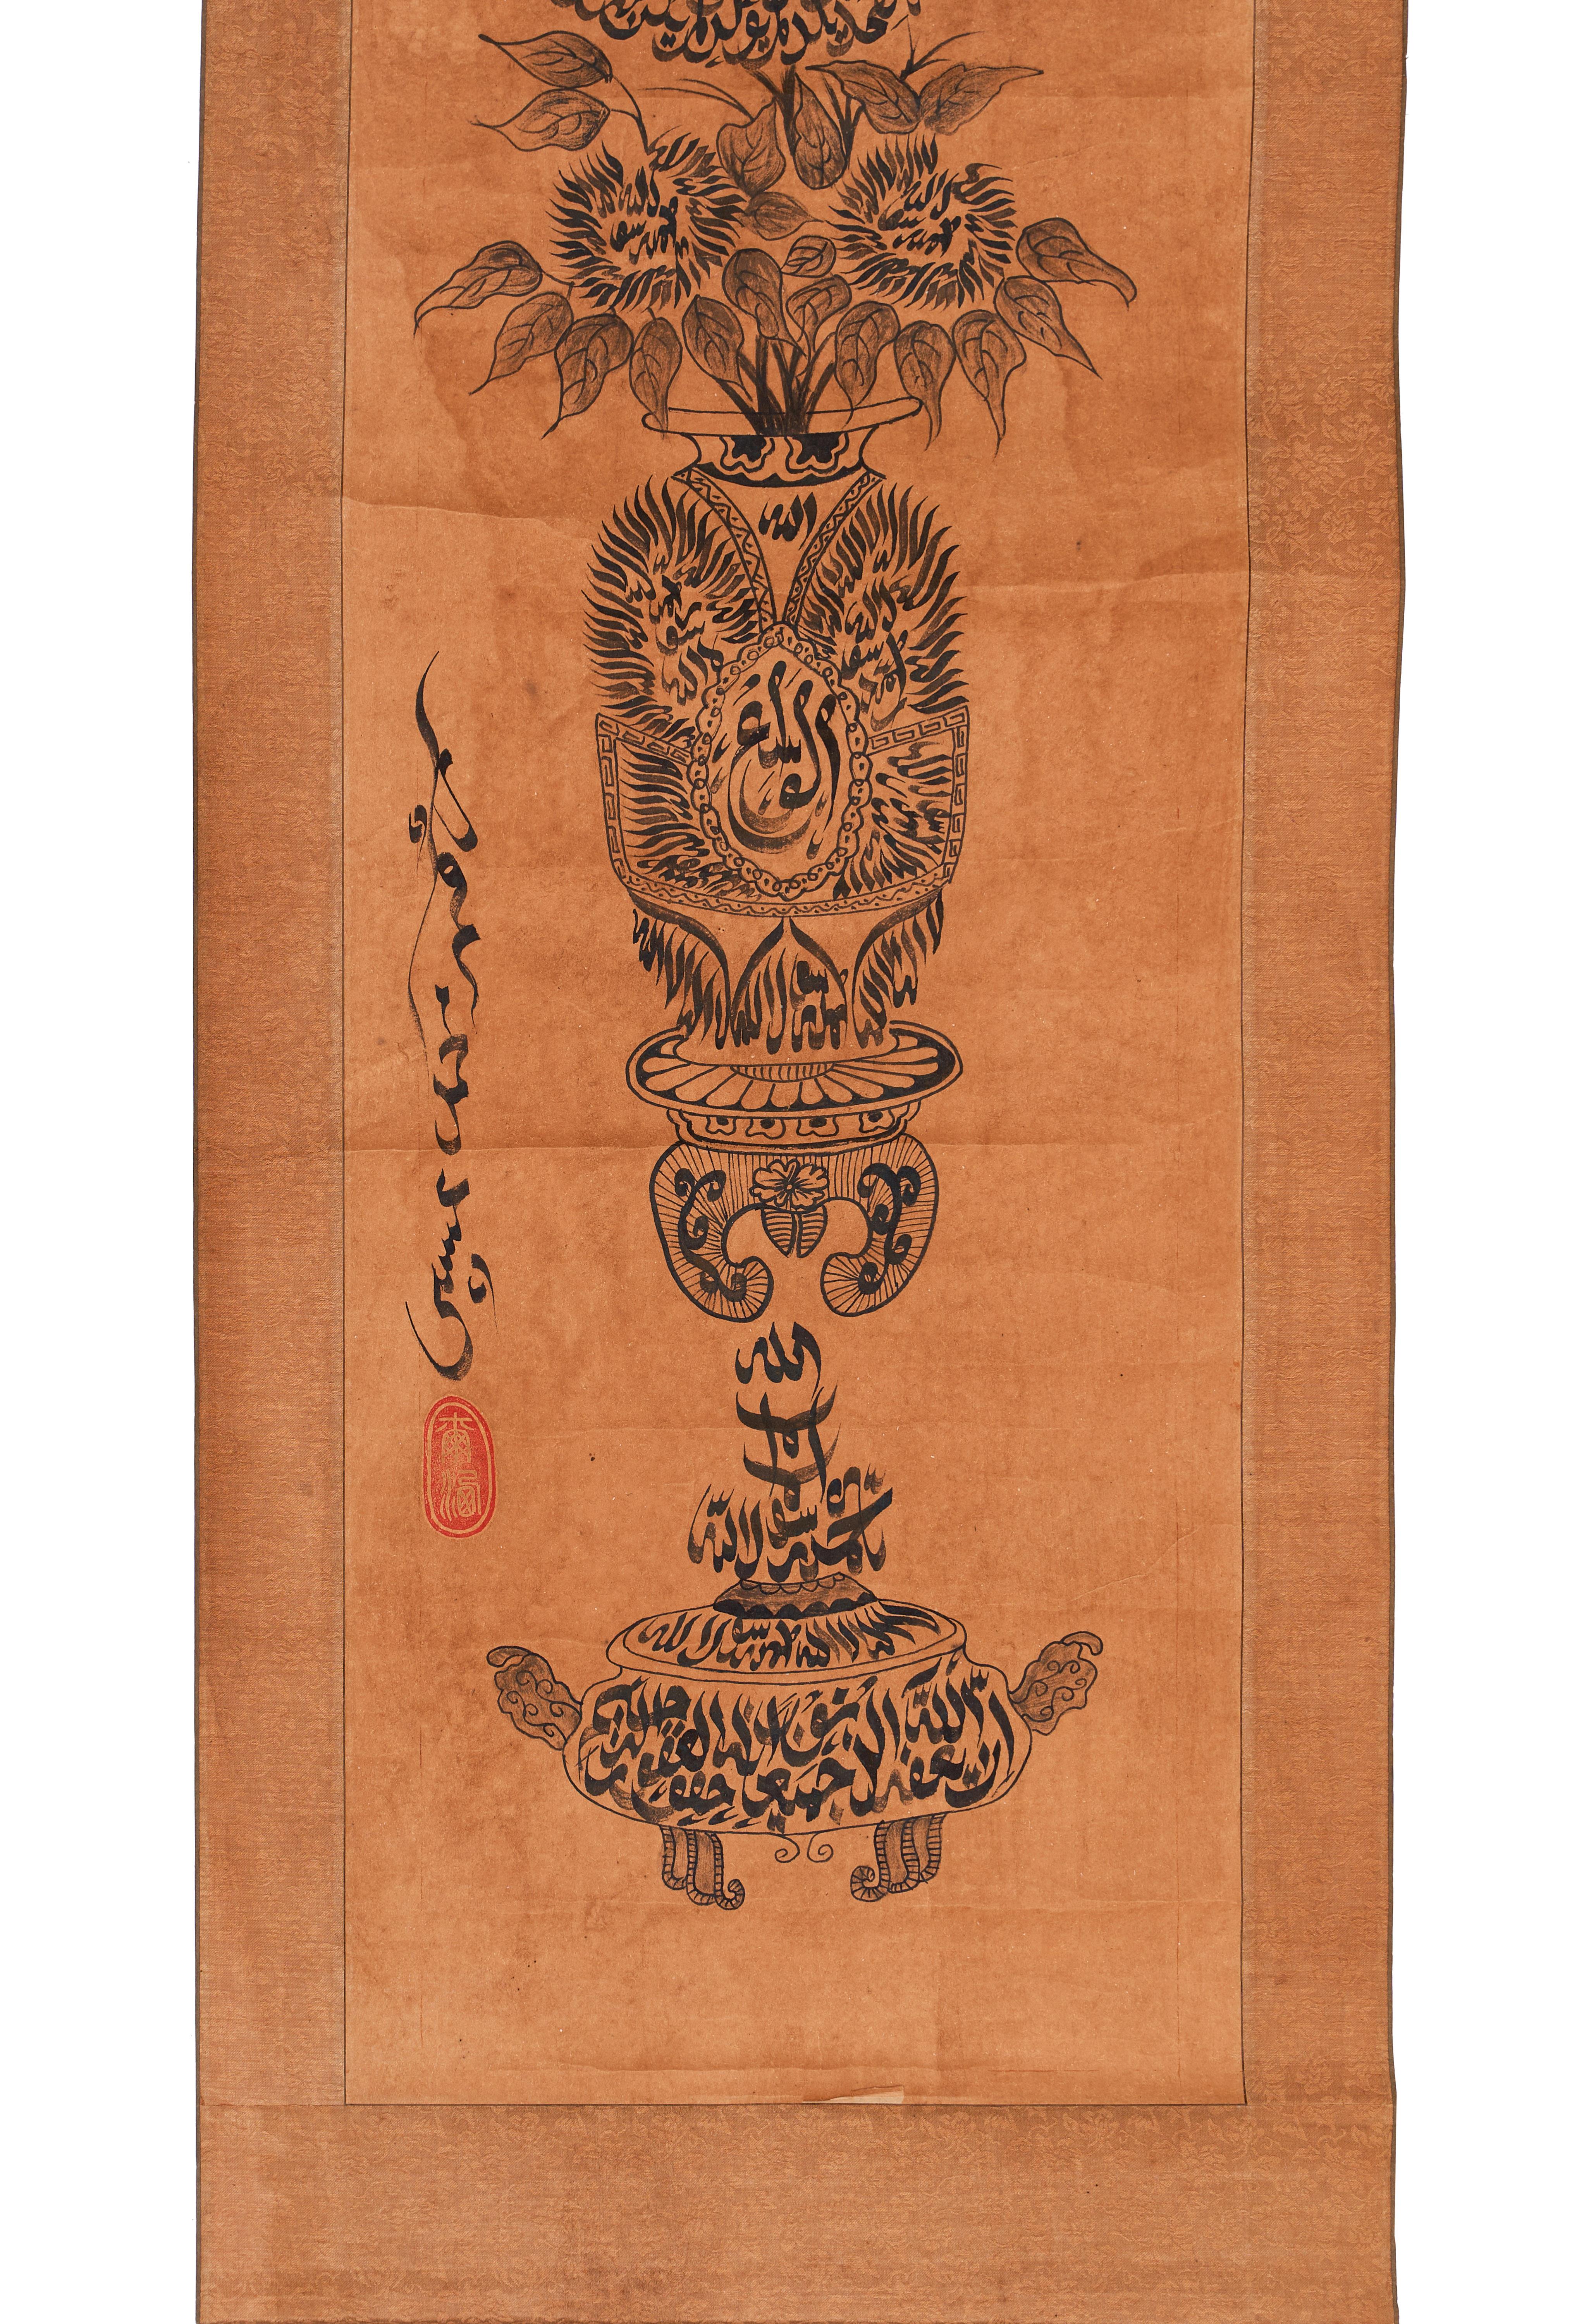 AN ISLAMIC INSCRIBED CHINESE SCROLL, QING DYNASTY (1644-1911) - Image 2 of 2